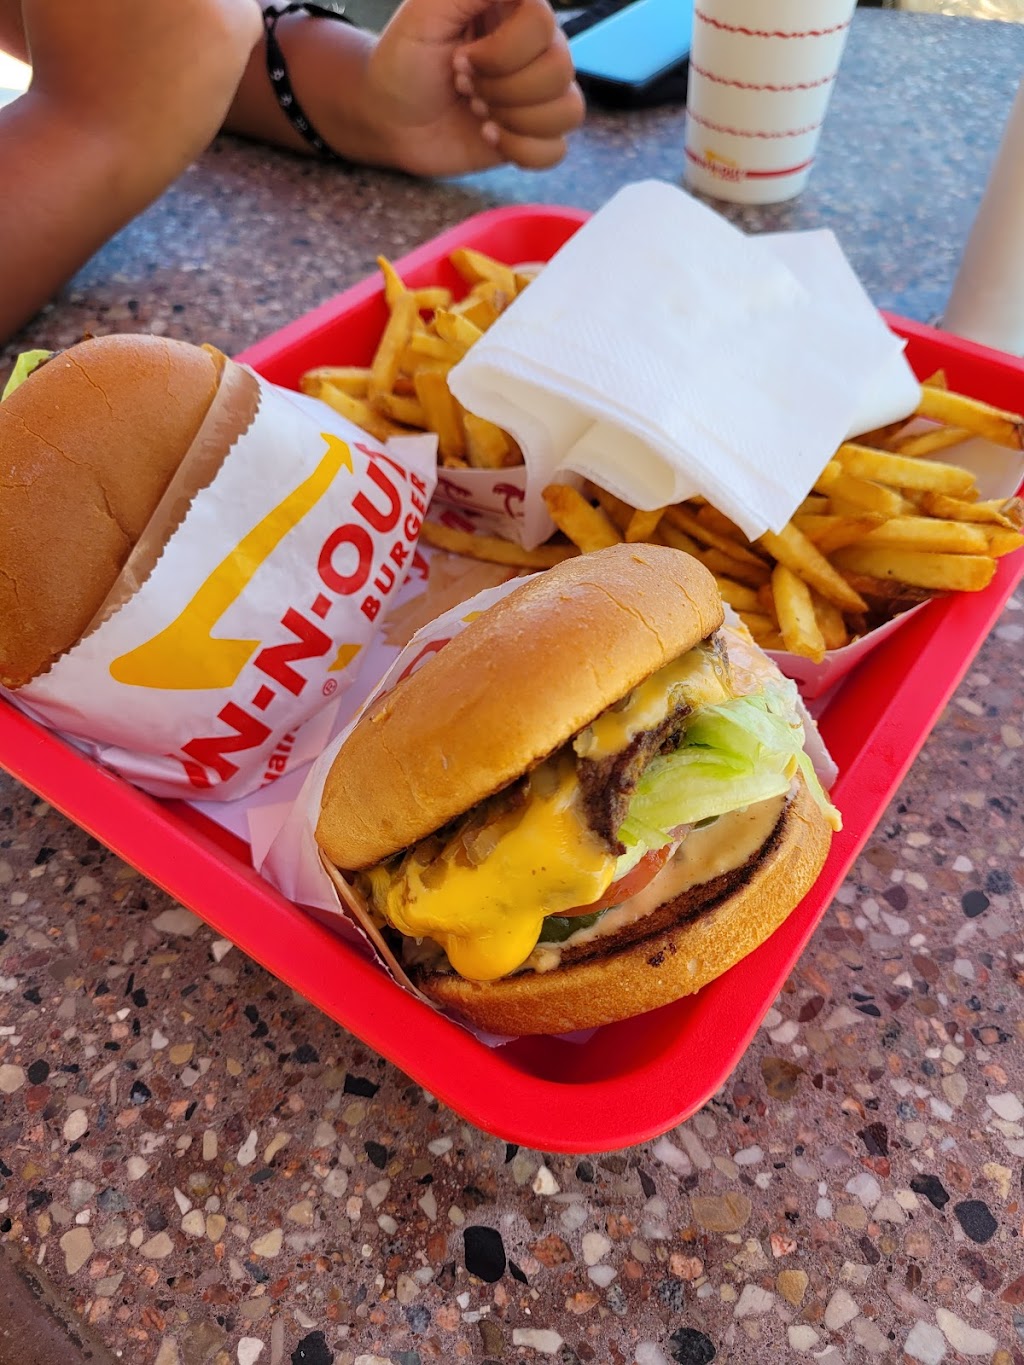 In-N-Out Burger | 7926 Valley View St, Buena Park, CA 90620, USA | Phone: (800) 786-1000